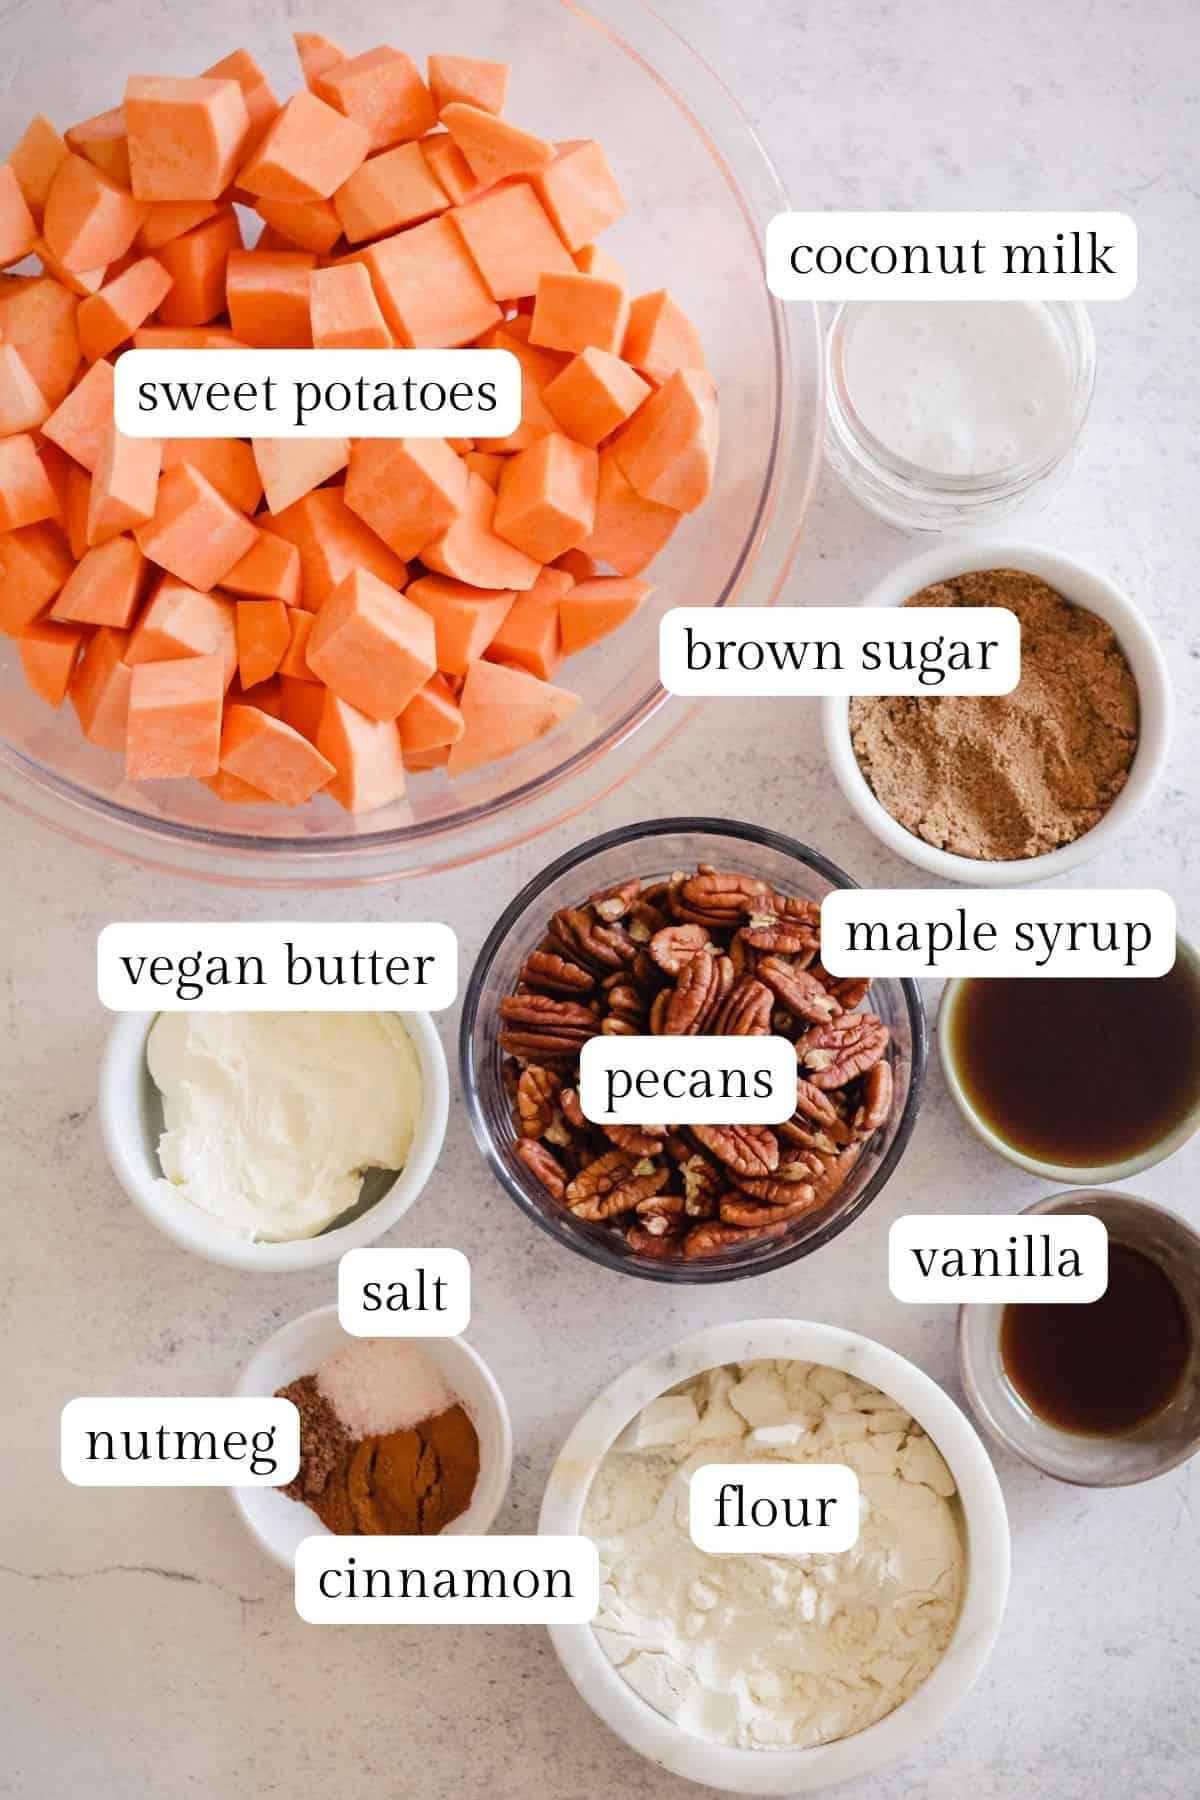 Labeled ingredients to make Vegan Sweet Potato Casserole with Pecan Topping.